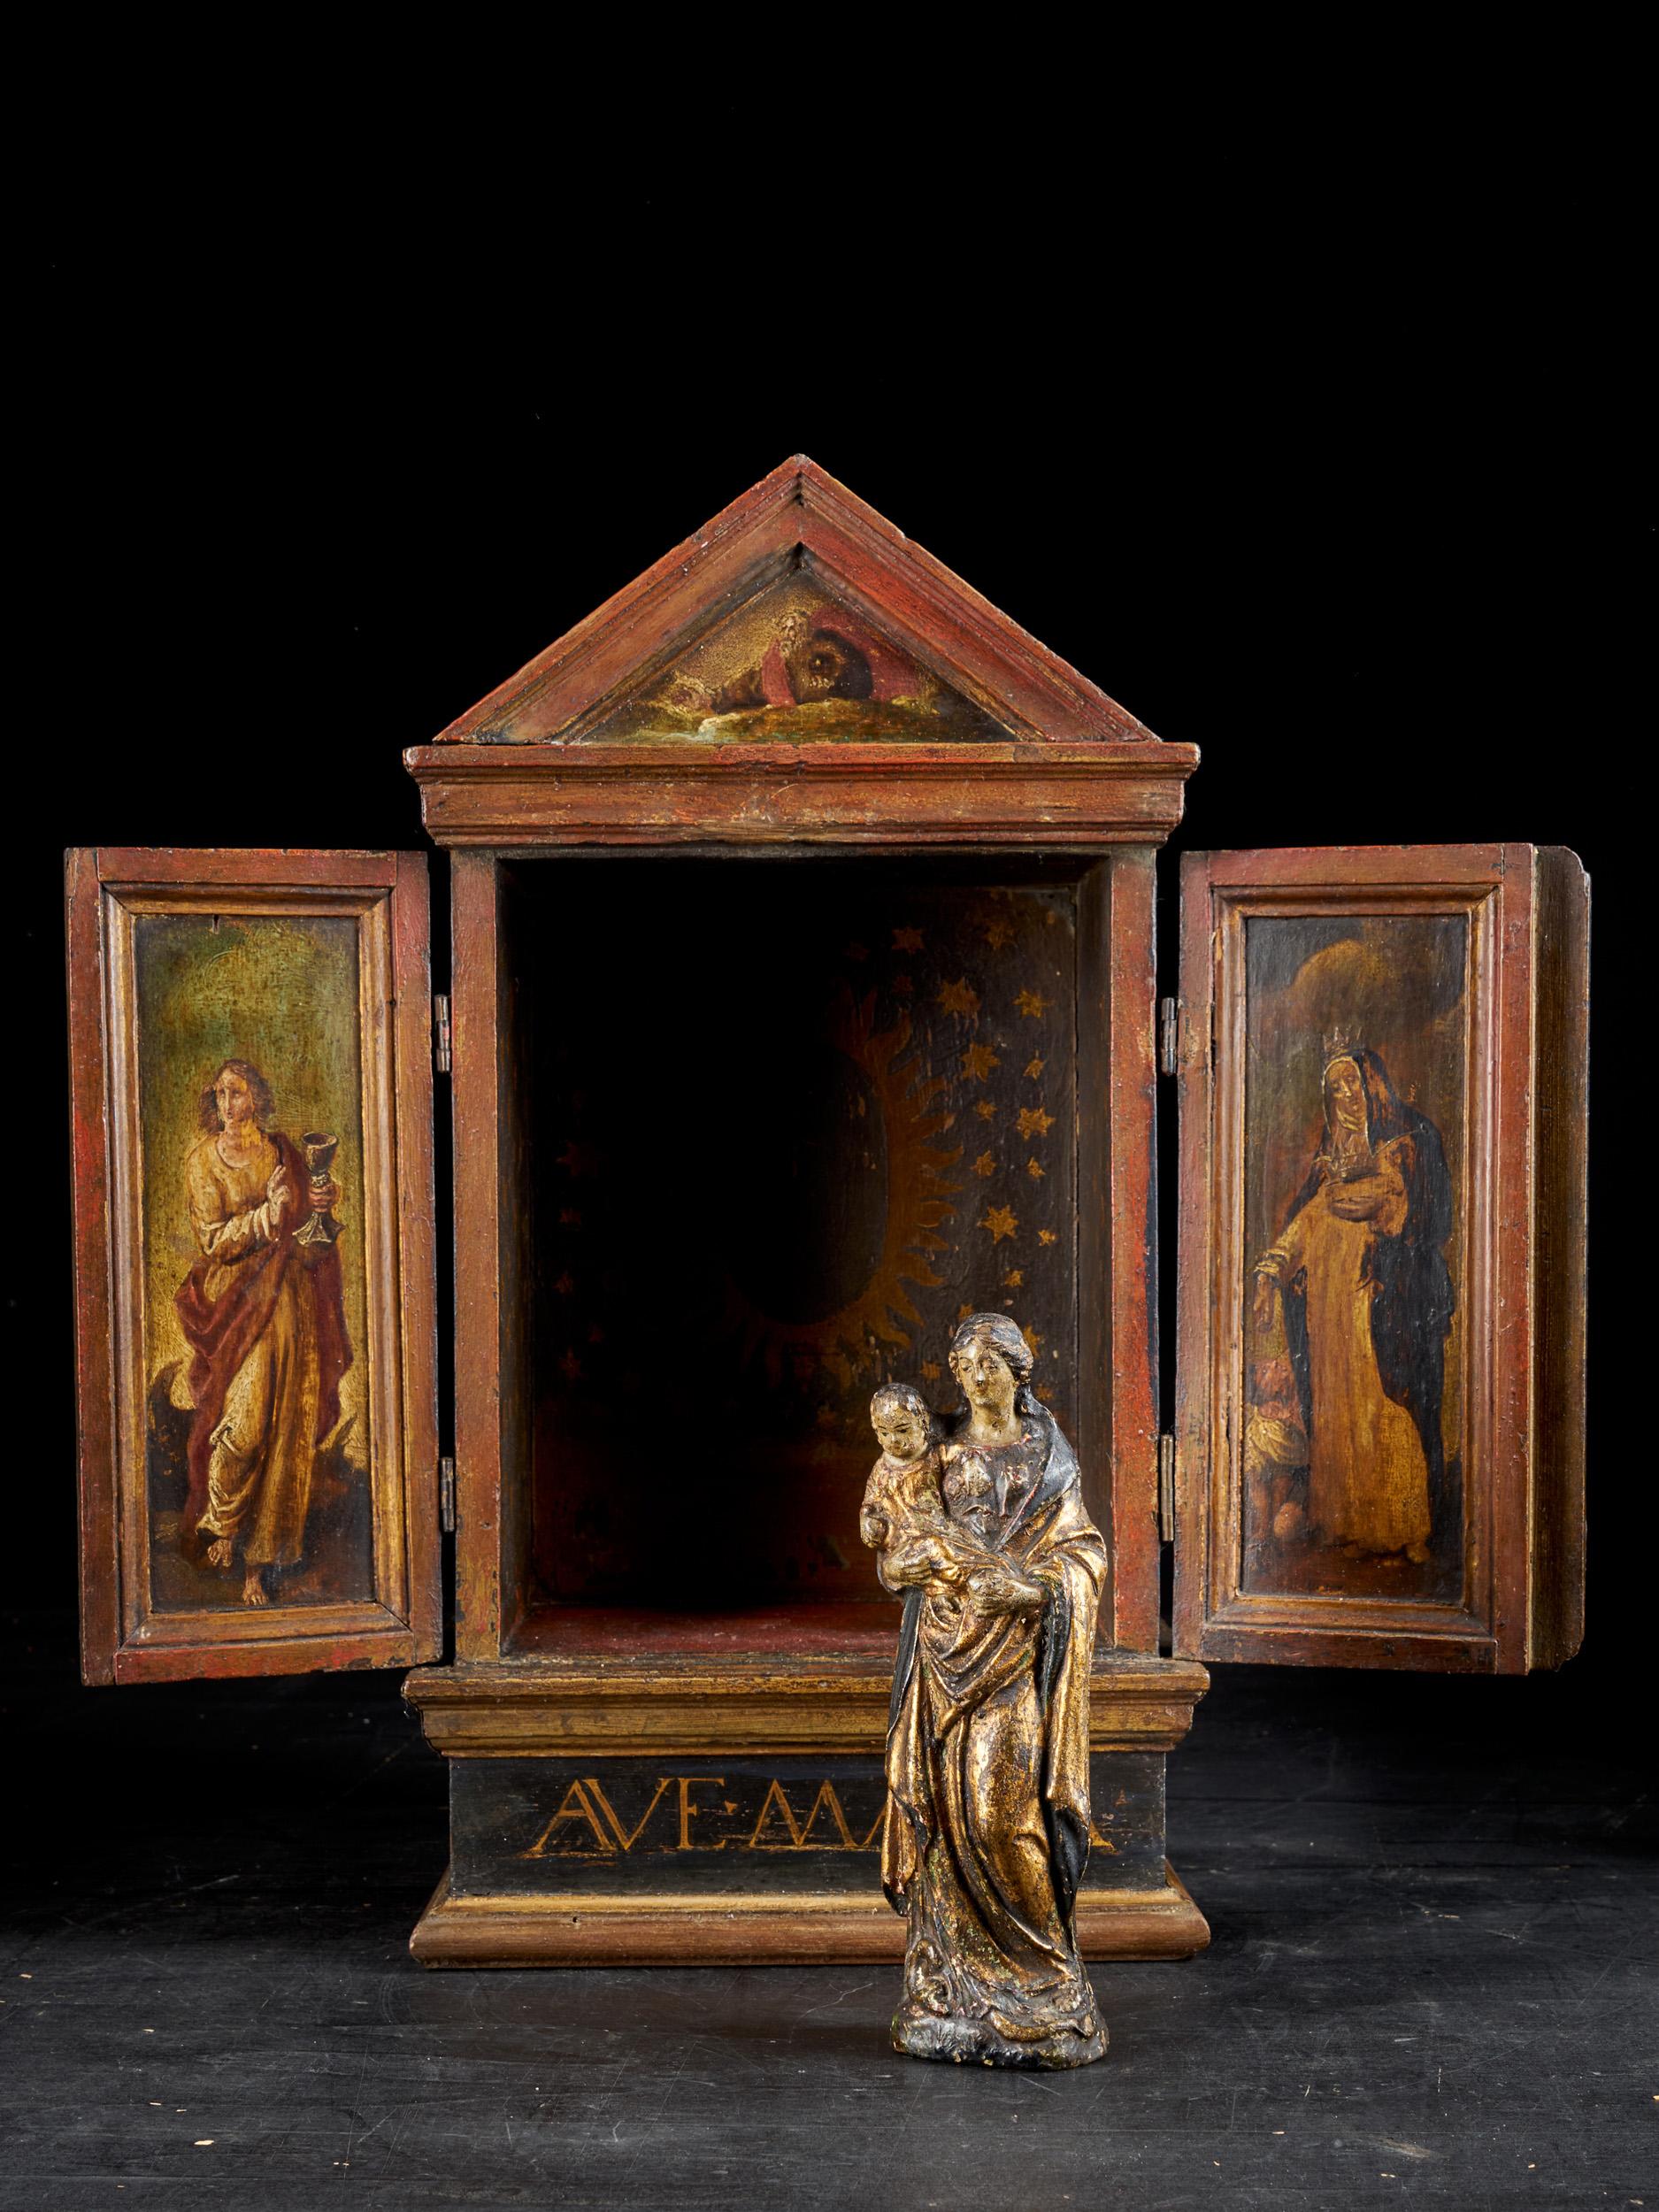 18th C, Flemish School, Madonna and Child in a Wooden Shrine  - Sculpture by Unknown